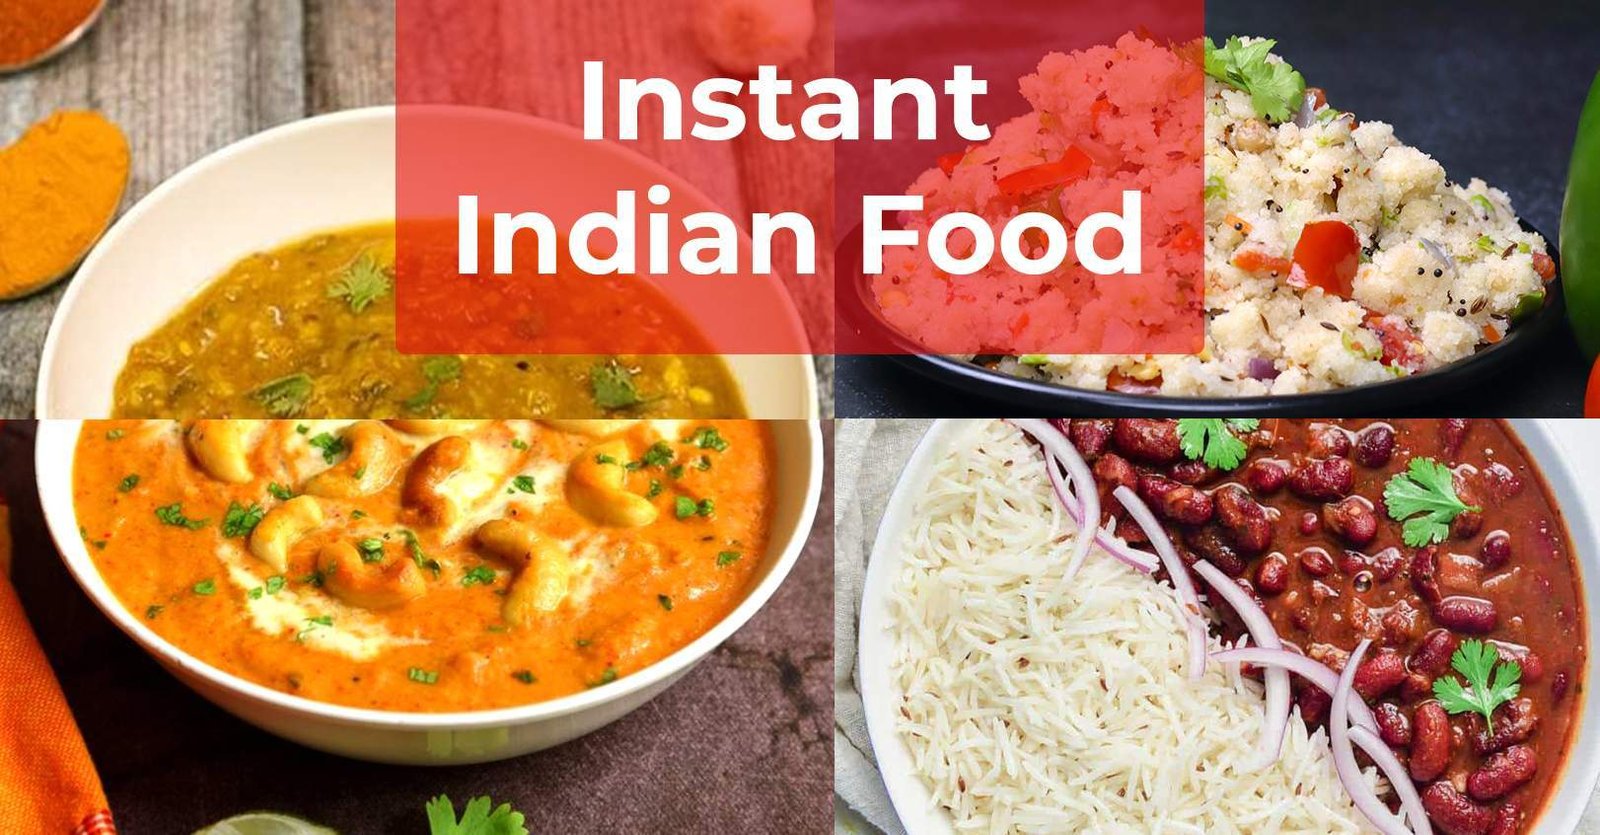 Instant Food For Your Instant Indian Food Cravings